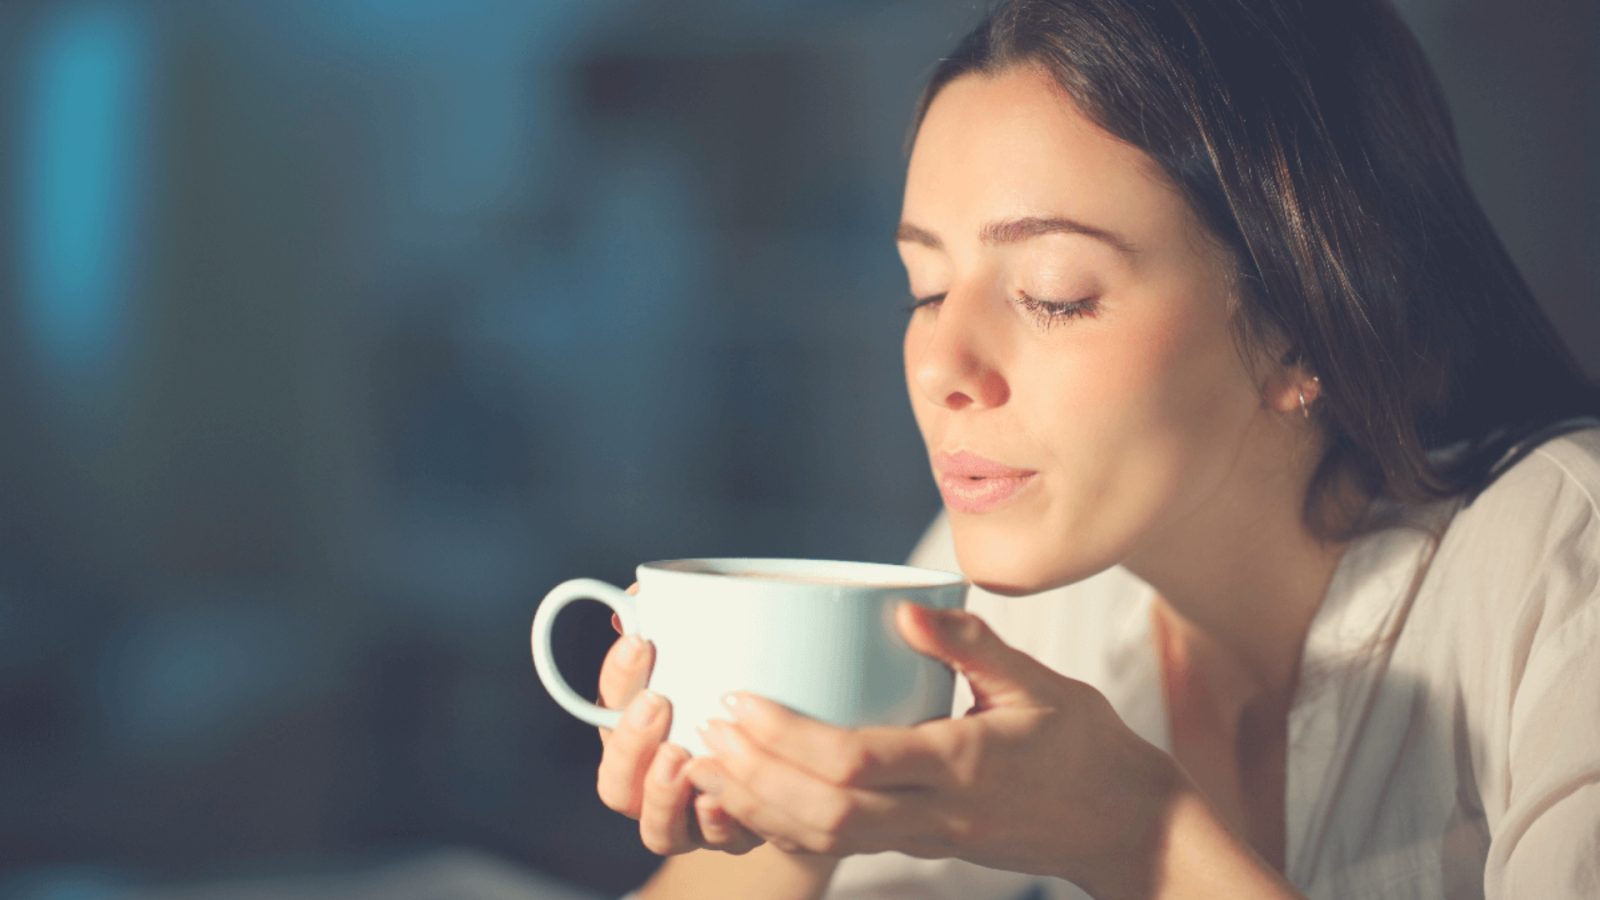 Woman blowing coffee 1920 x 1080 px